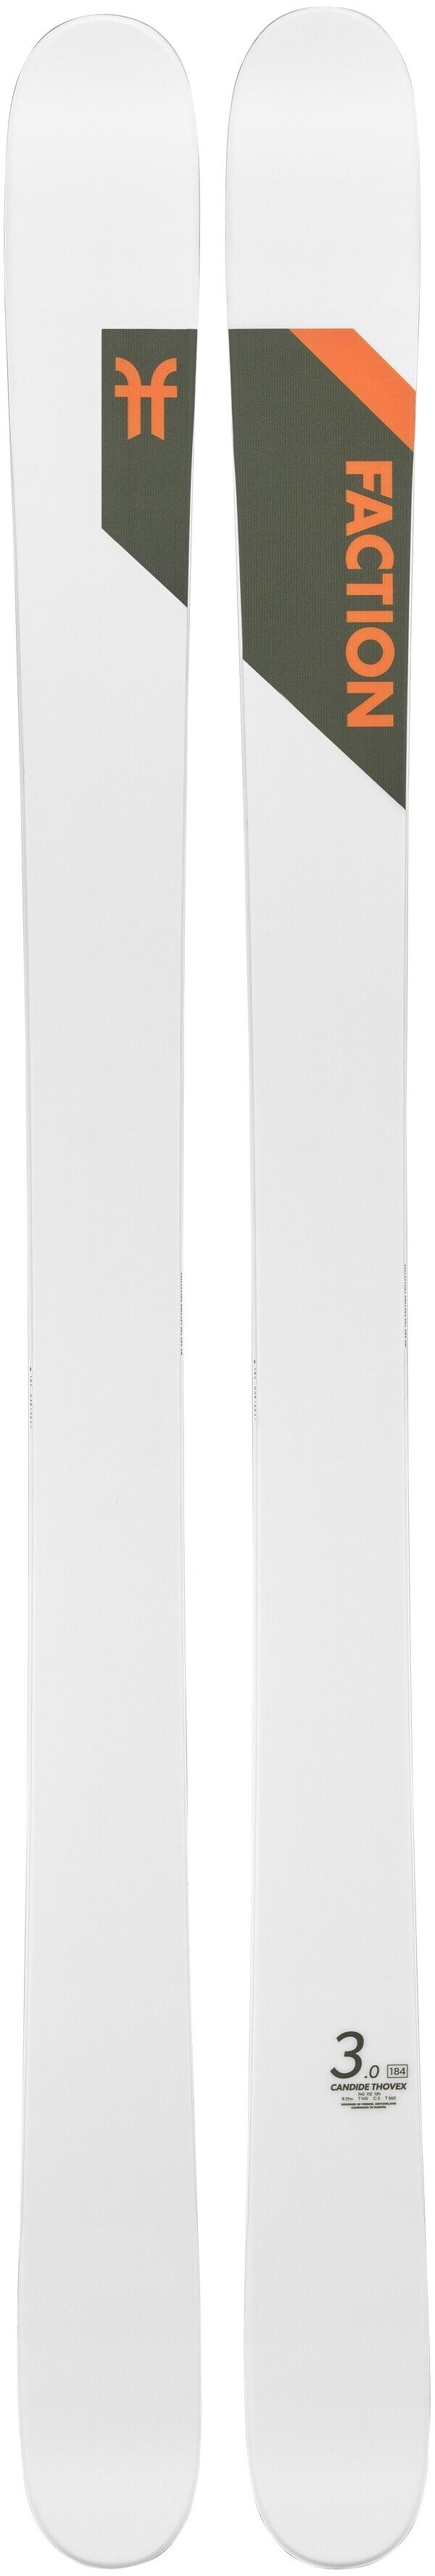 New , 2022, Faction, Candide 3.0 Skis 184cm